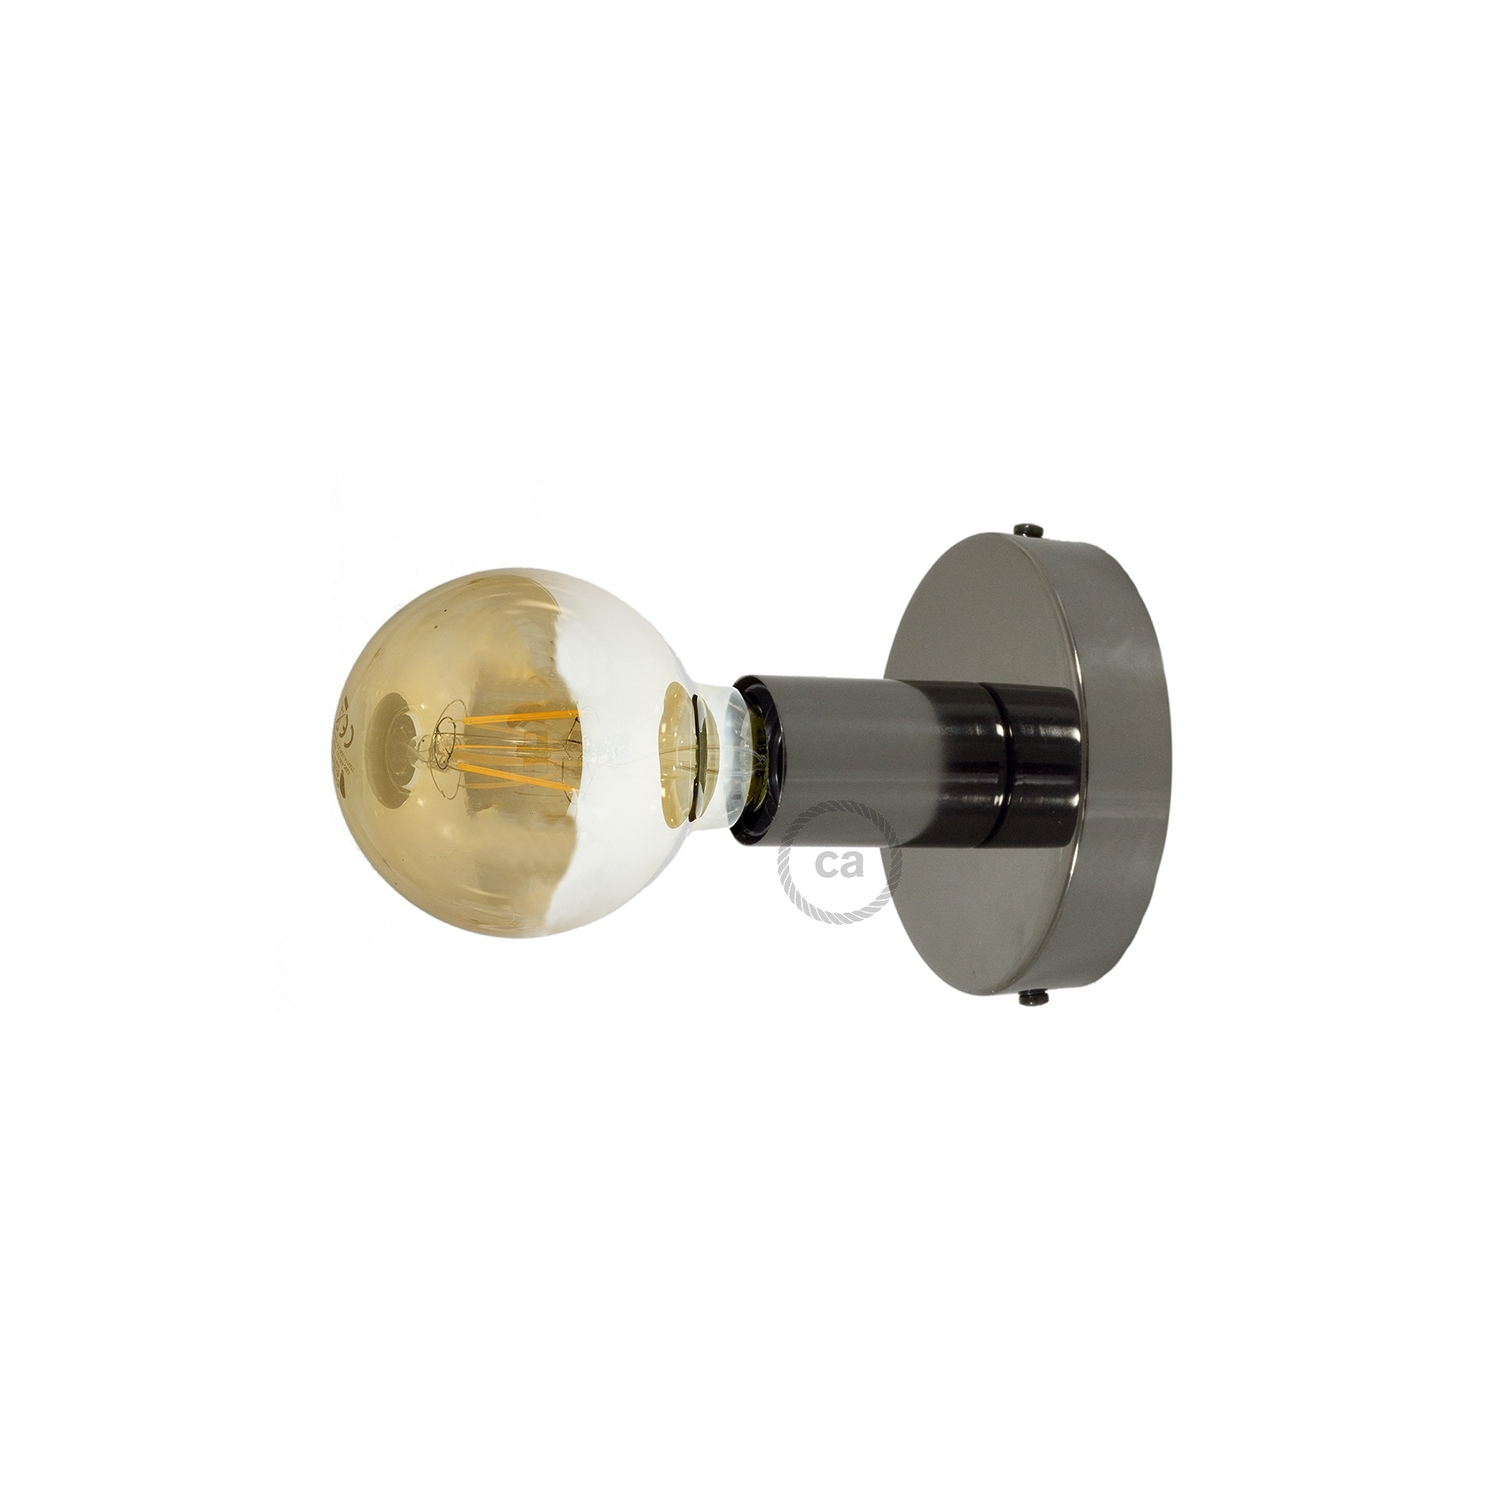 Fermaluce, the black pearl metal wall or ceiling light source.